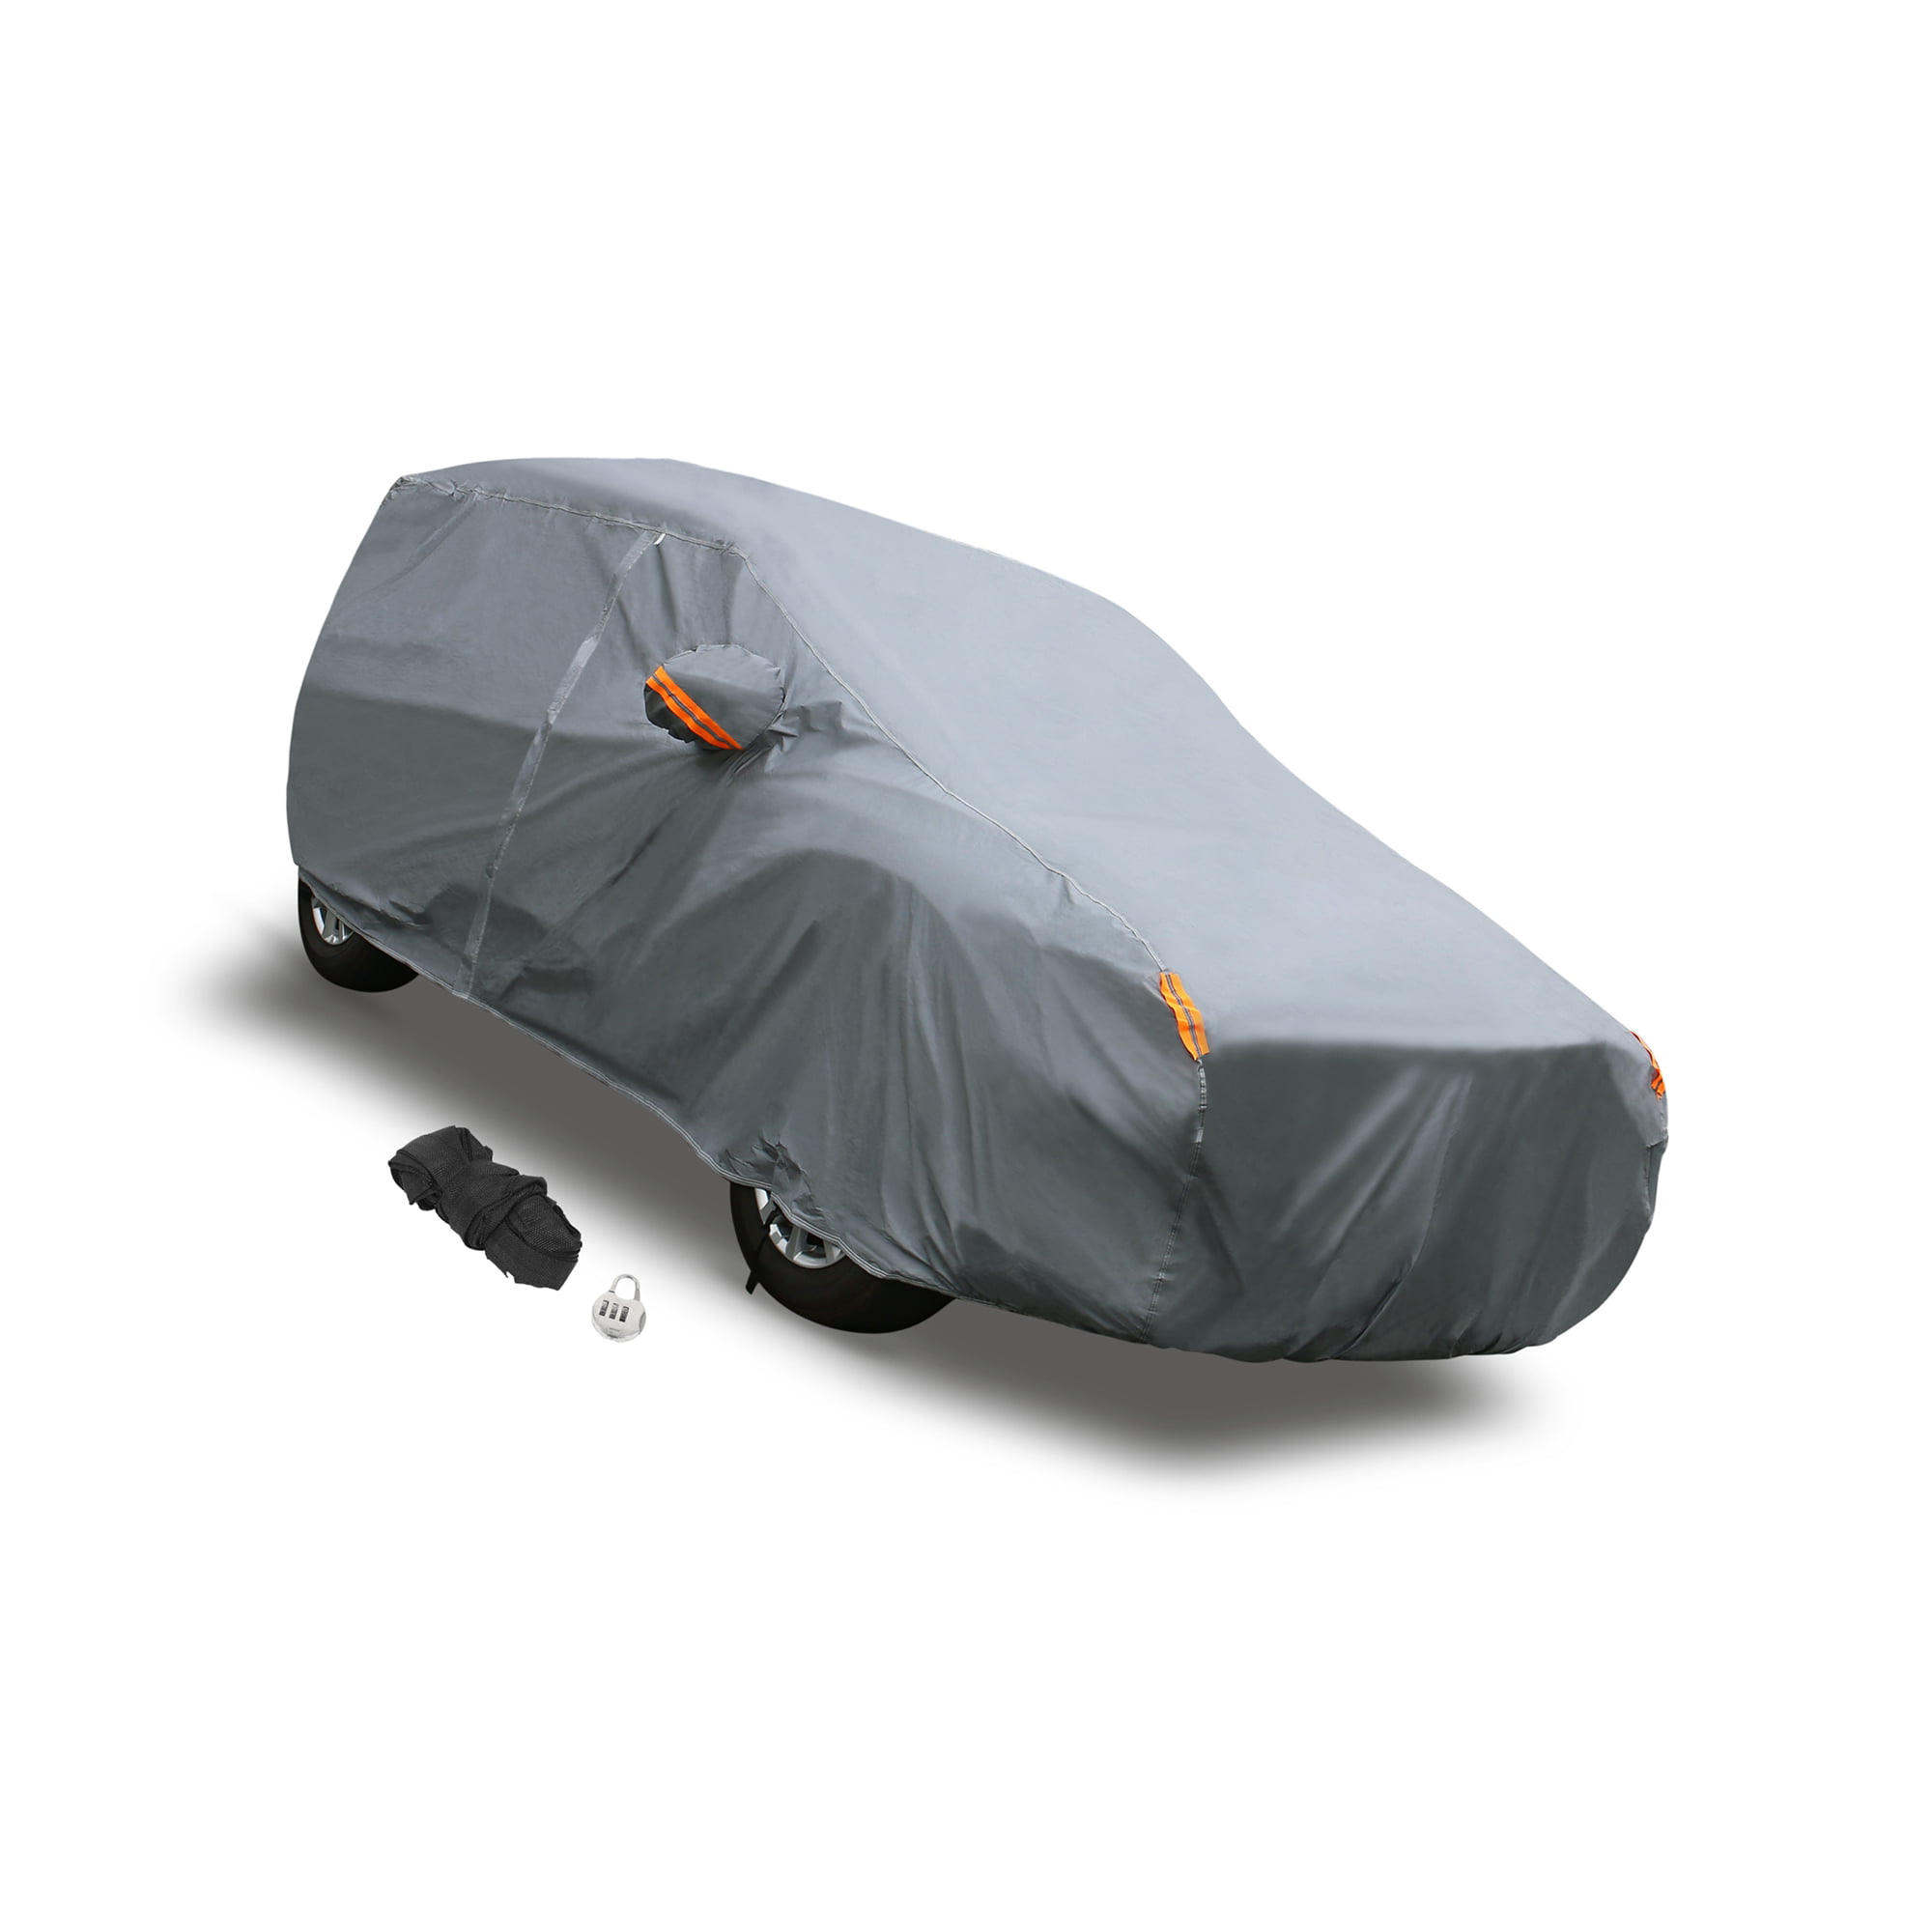 Full Car Cover Soft Lining W/ Zipper Door Fit for SUV L Up to 191 Gray 